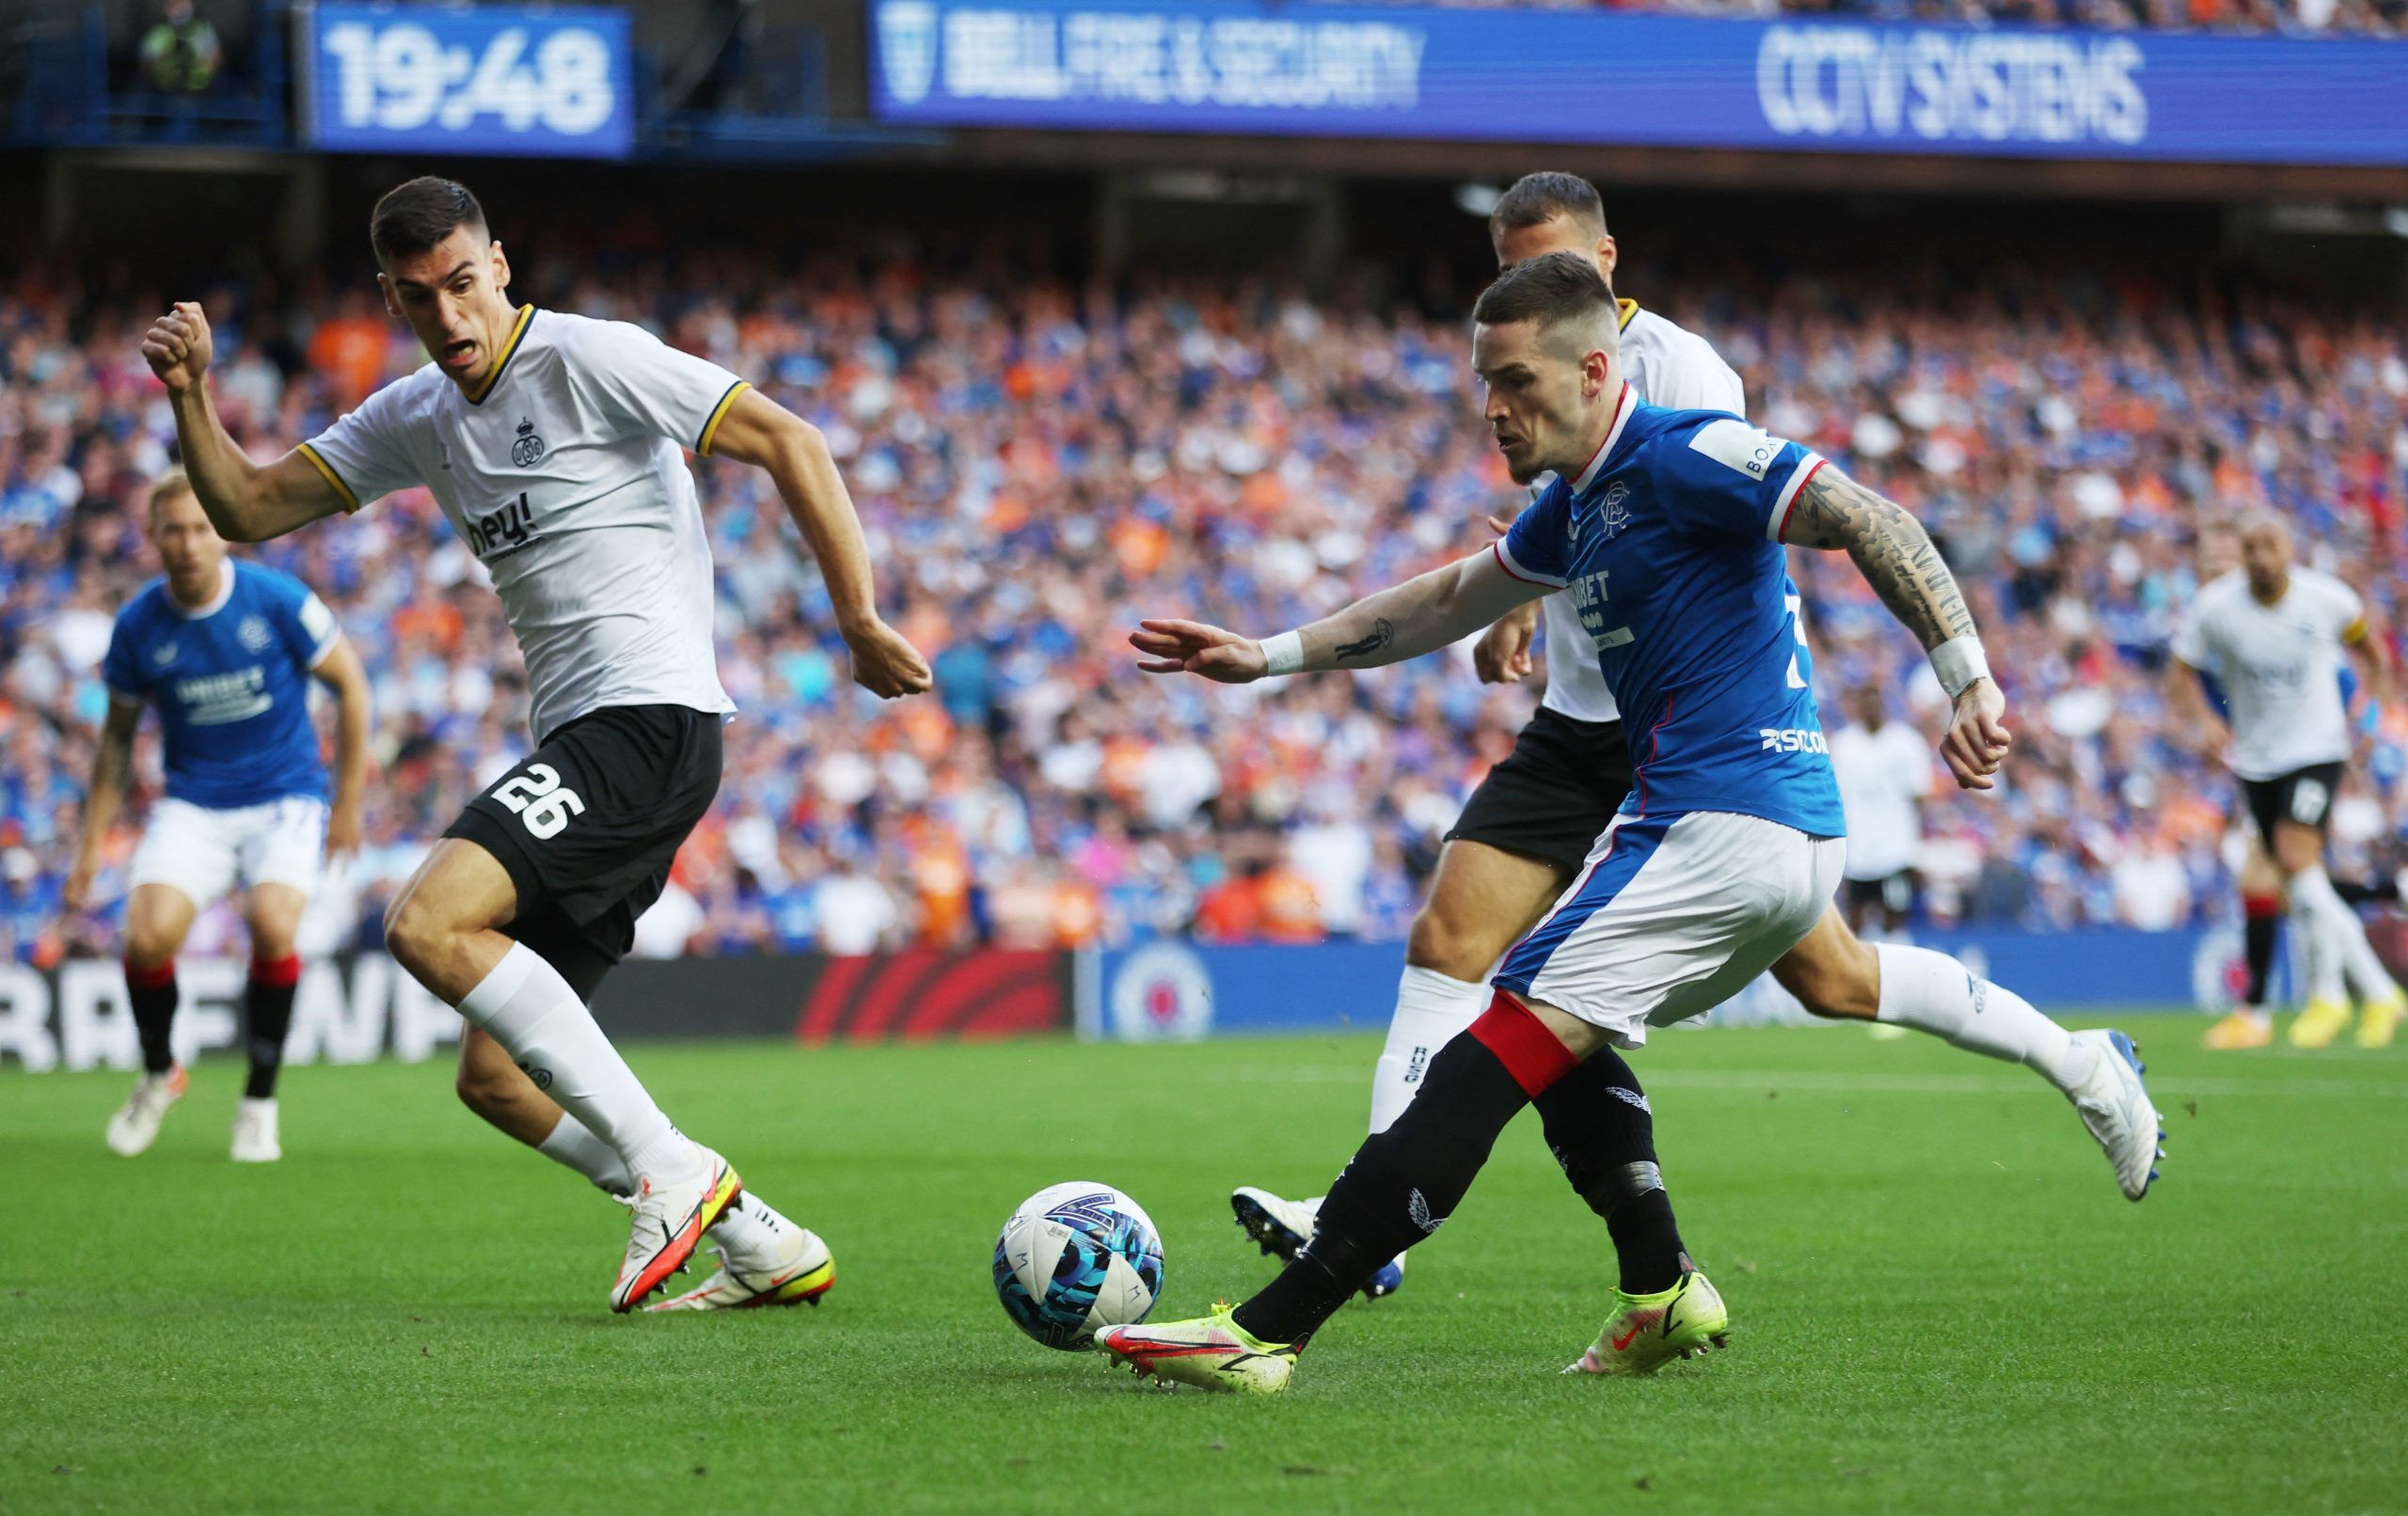 Rangers: Ryan Kent signing a new contract ‘would be a massive coup’ -Rangers News